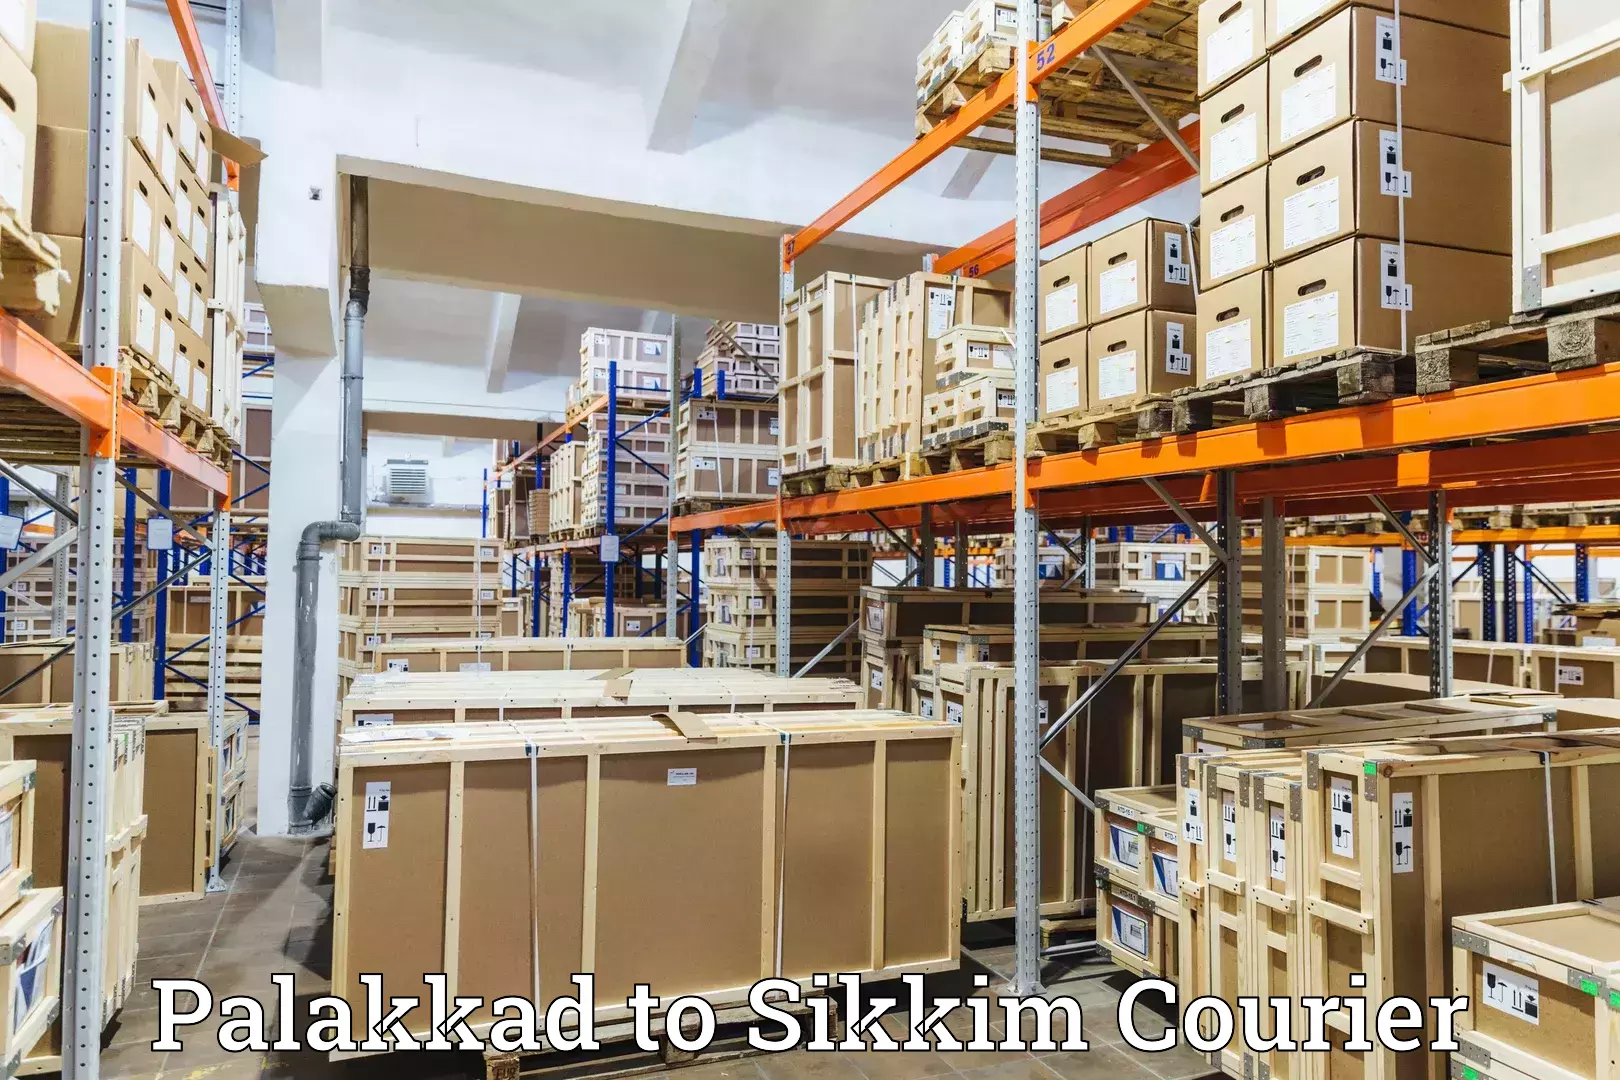 Sustainable shipping practices Palakkad to East Sikkim